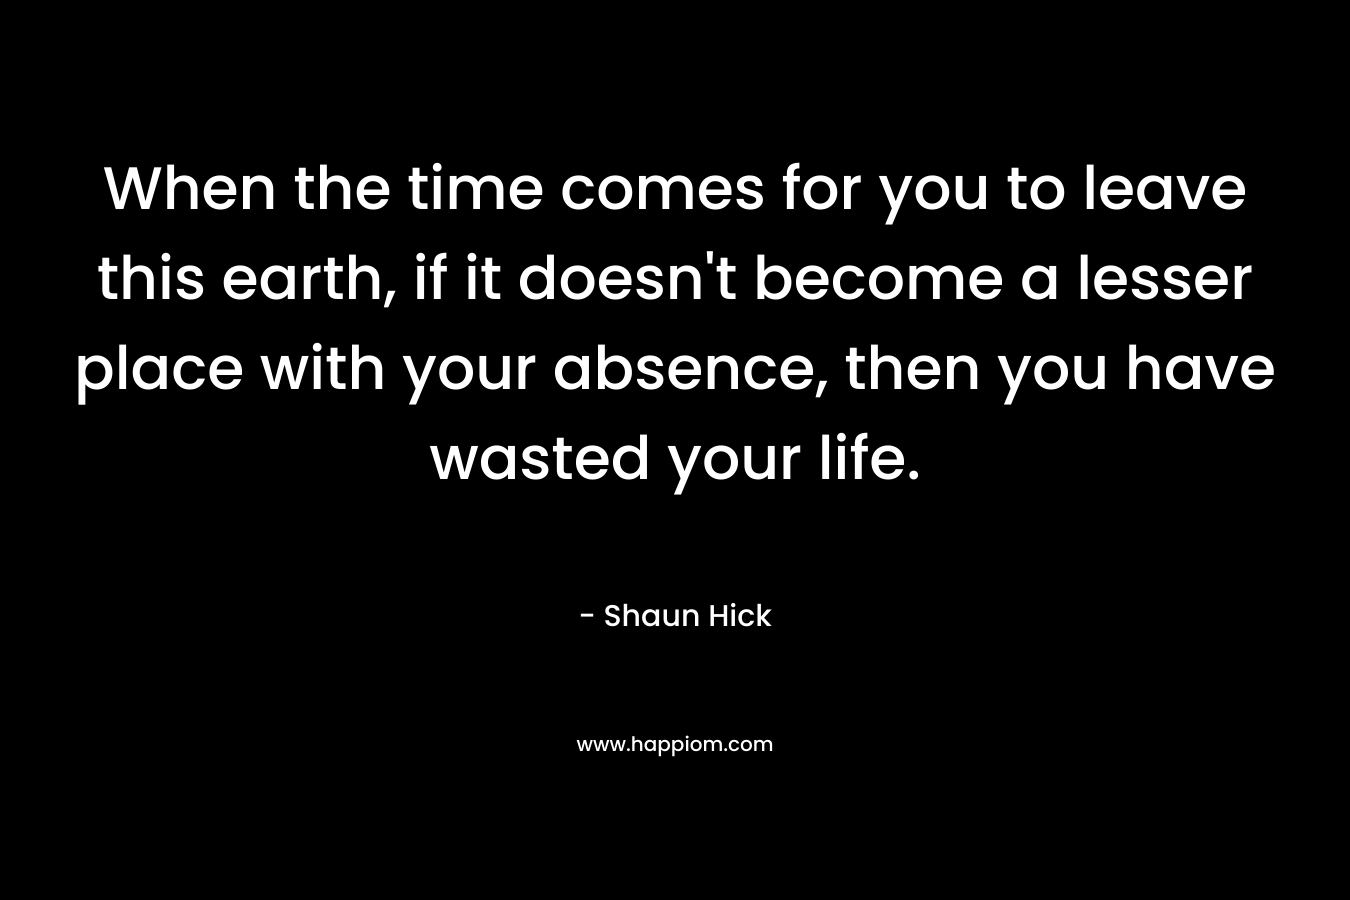 When the time comes for you to leave this earth, if it doesn't become a lesser place with your absence, then you have wasted your life.